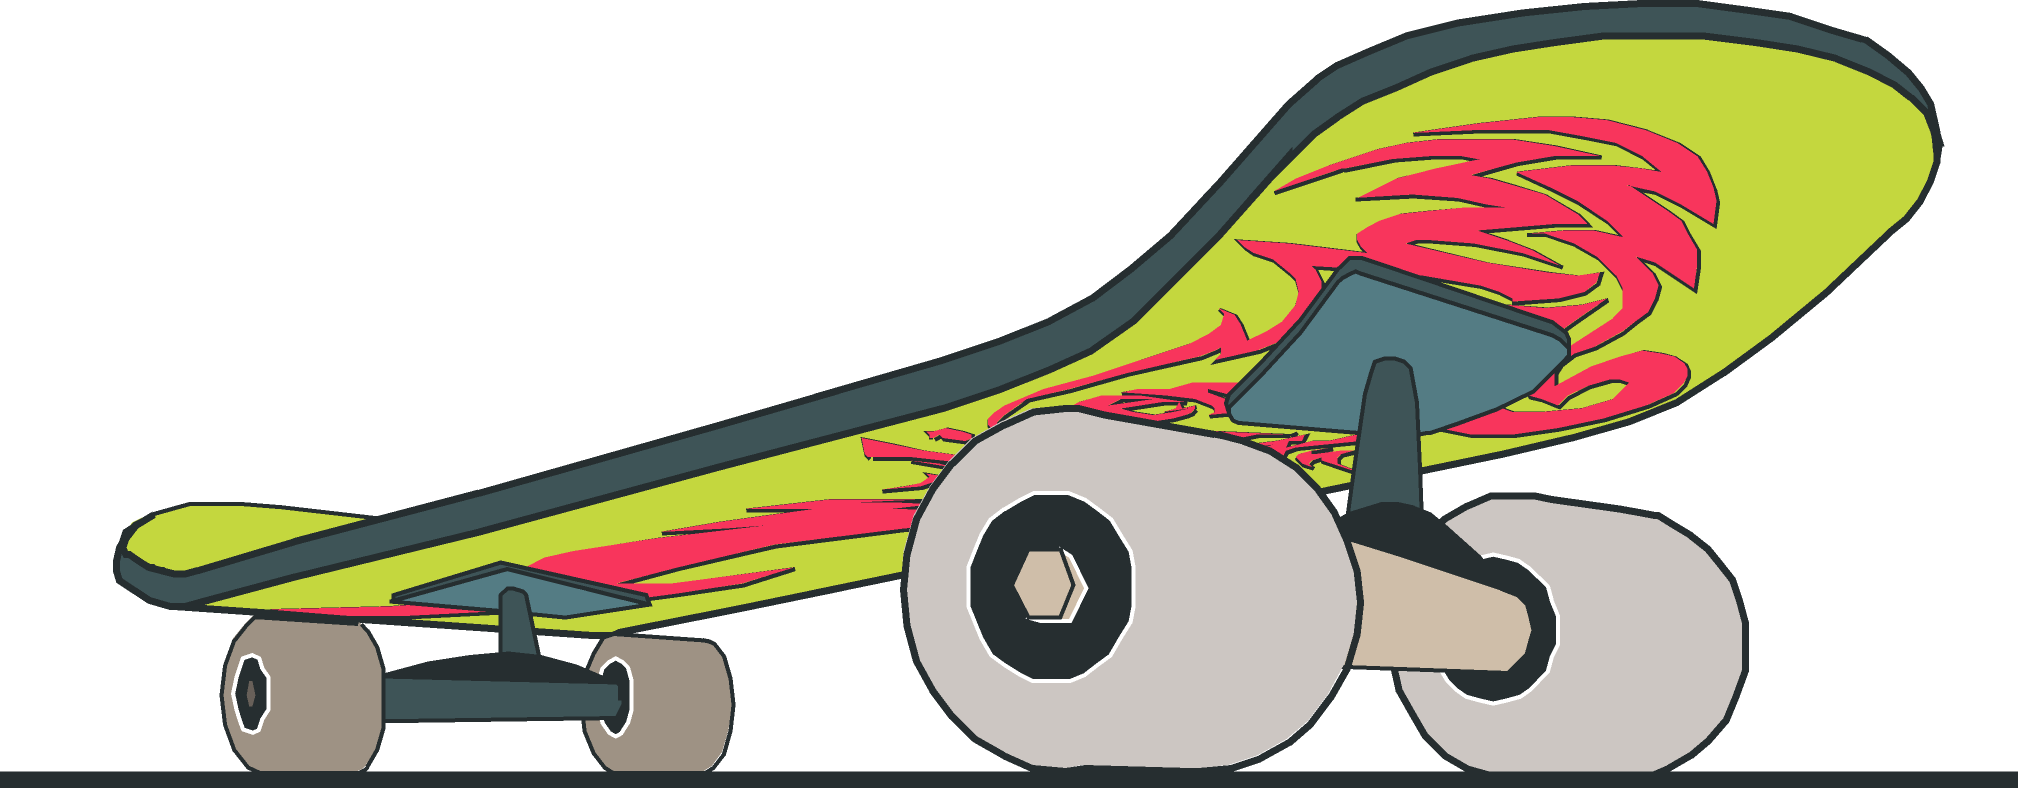 Skateboard close up with design free vector 4vector clipart